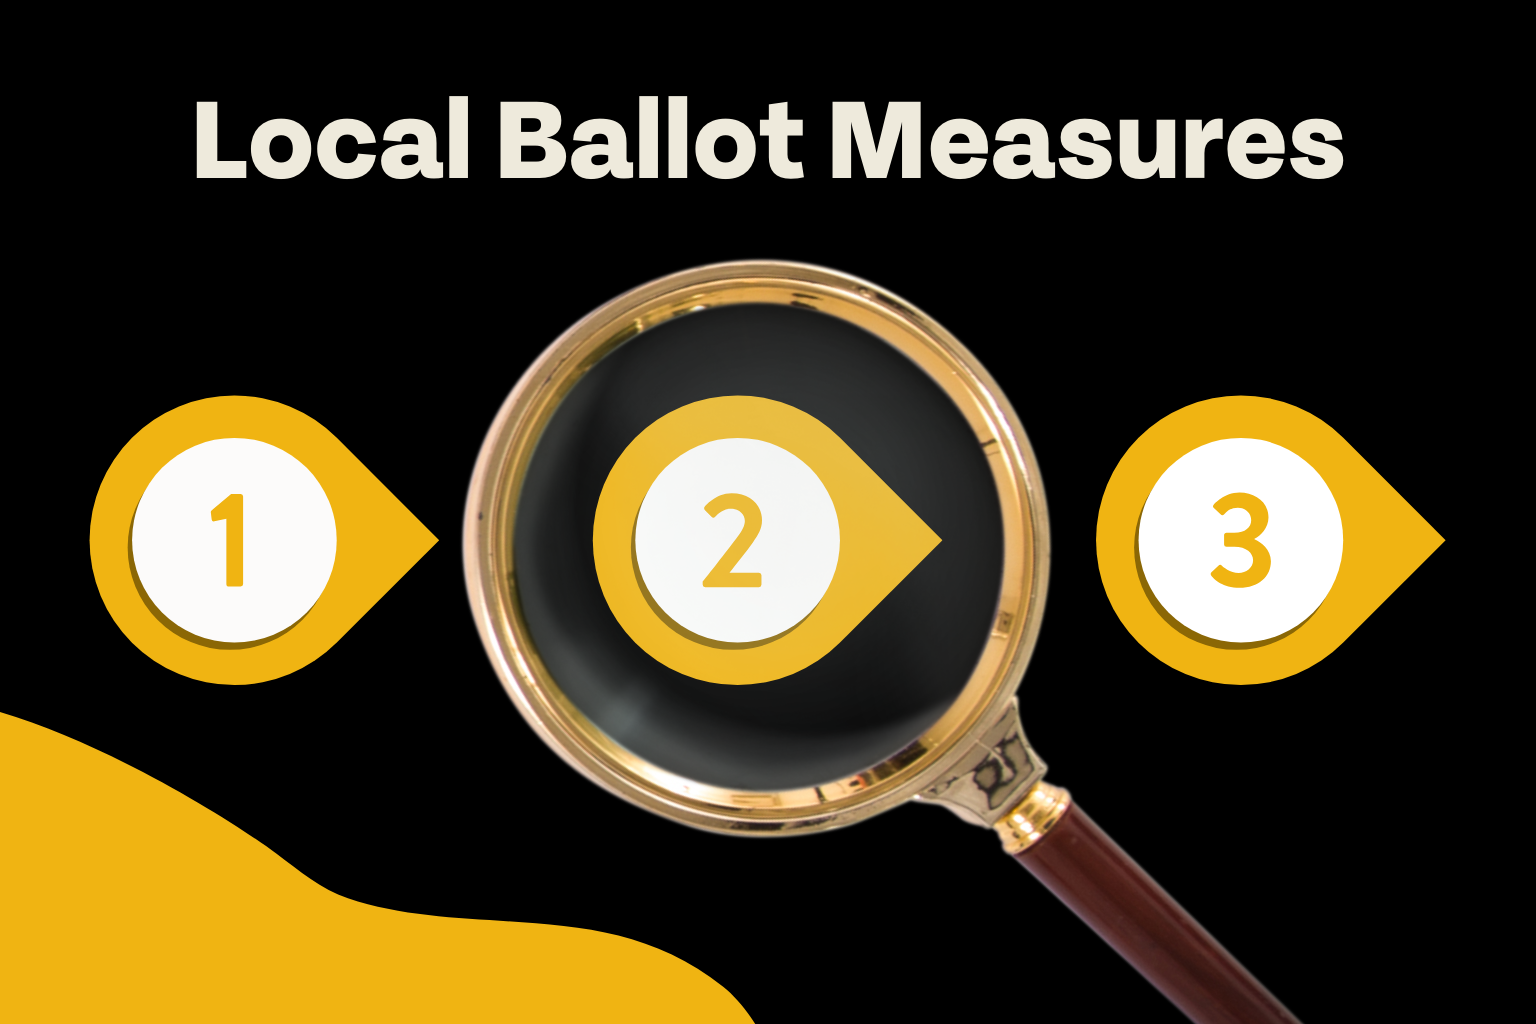 Analyzing local ballot measures: an in-depth look at Local Ballot Measures.